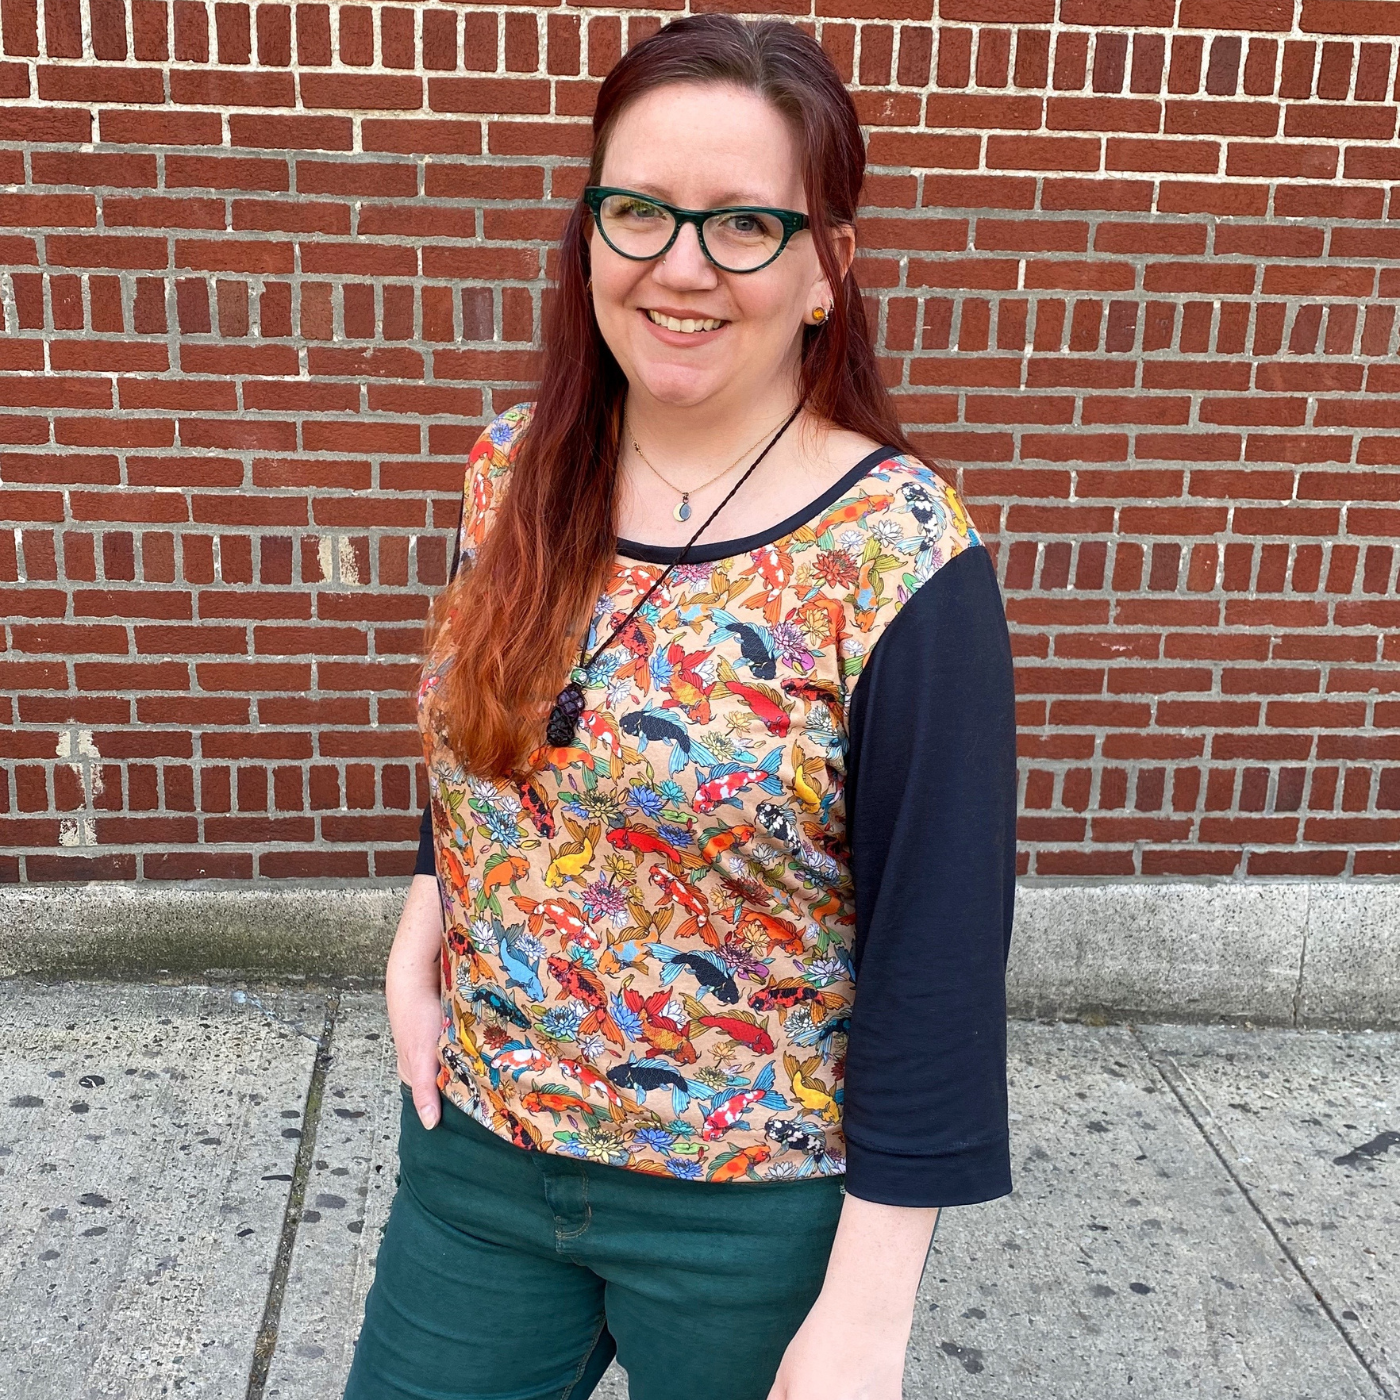 Jessie stands in front of a red brick building smiling, wearing a three-quarter-length-sleeve top with black sleeves and dark teal pants. A print of rainbow koi swimming all over a peach background is all over the rest of the t-shirt except for a small bit of black fabric around the neck.